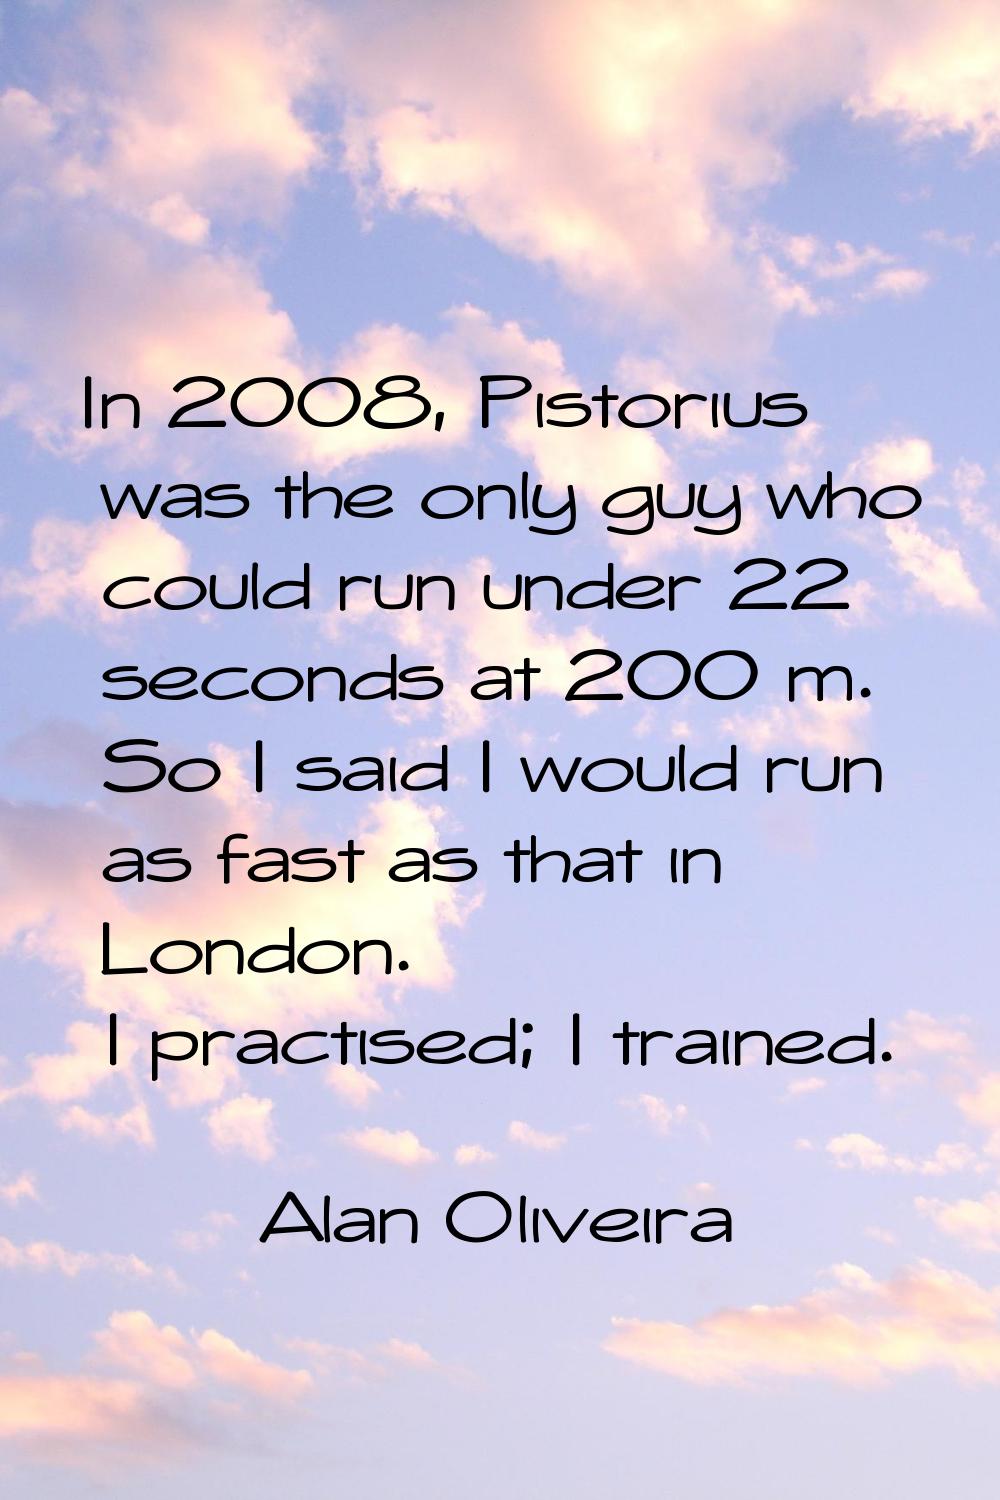 In 2008, Pistorius was the only guy who could run under 22 seconds at 200 m. So I said I would run 